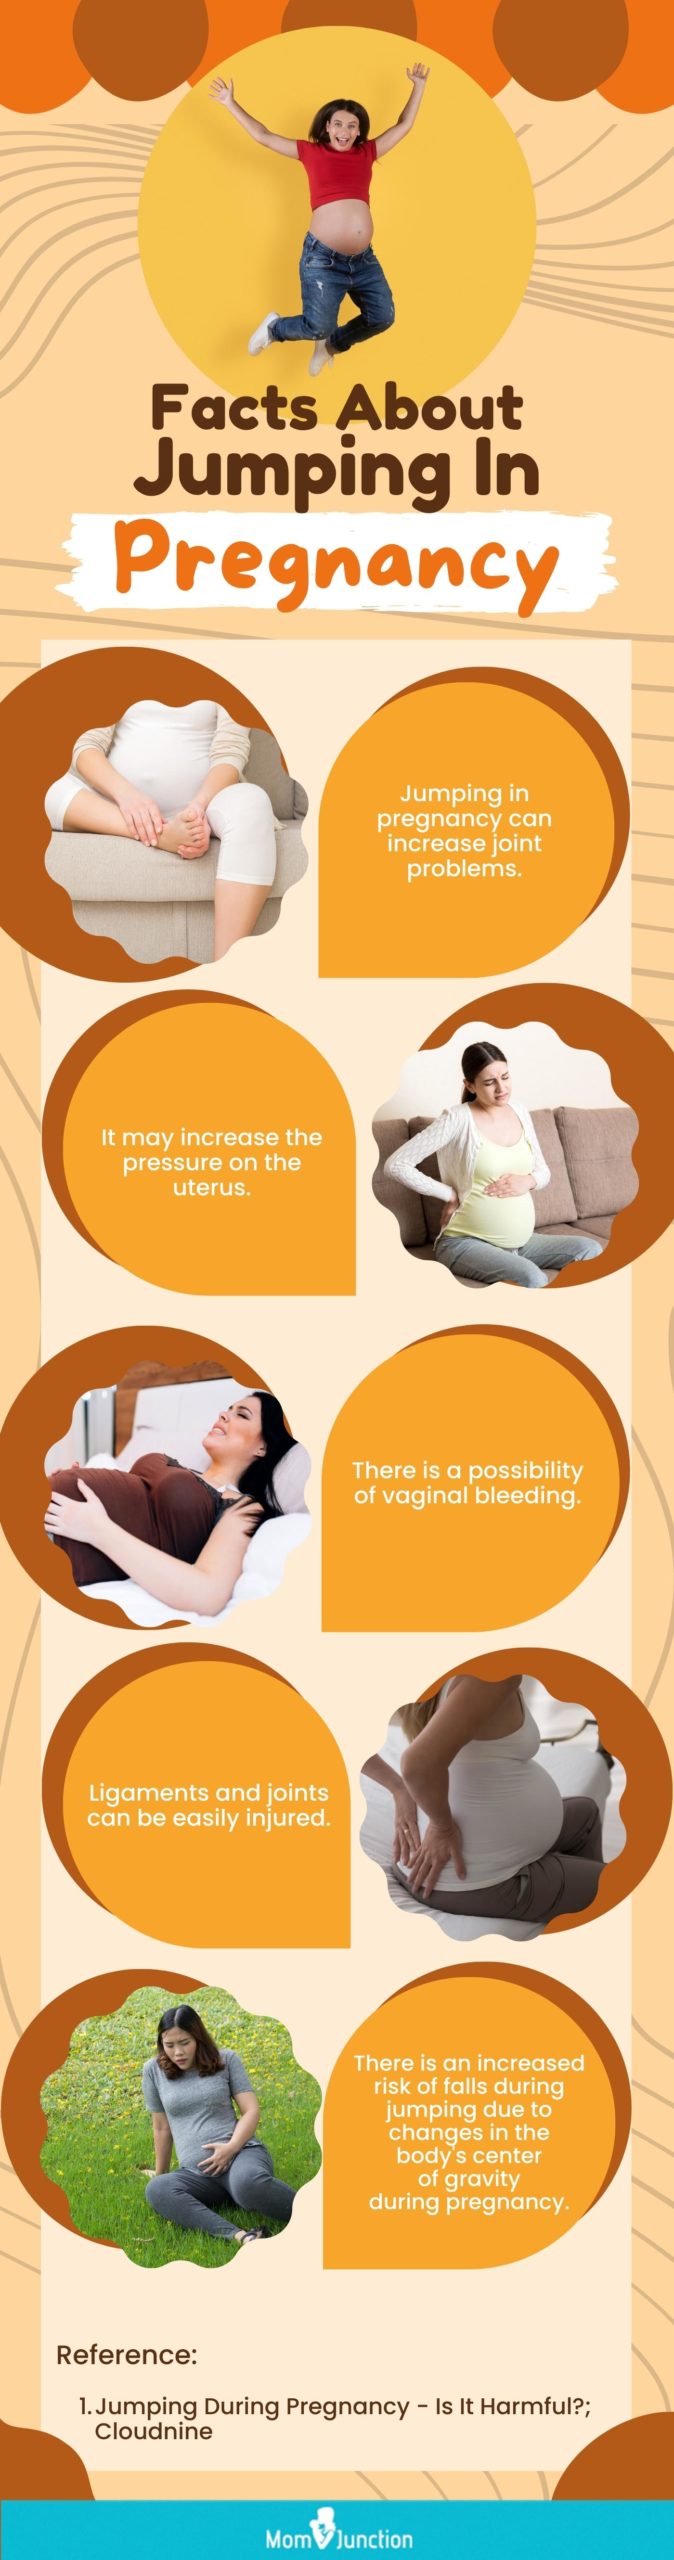 facts about jumping in pregnancy (infographic)